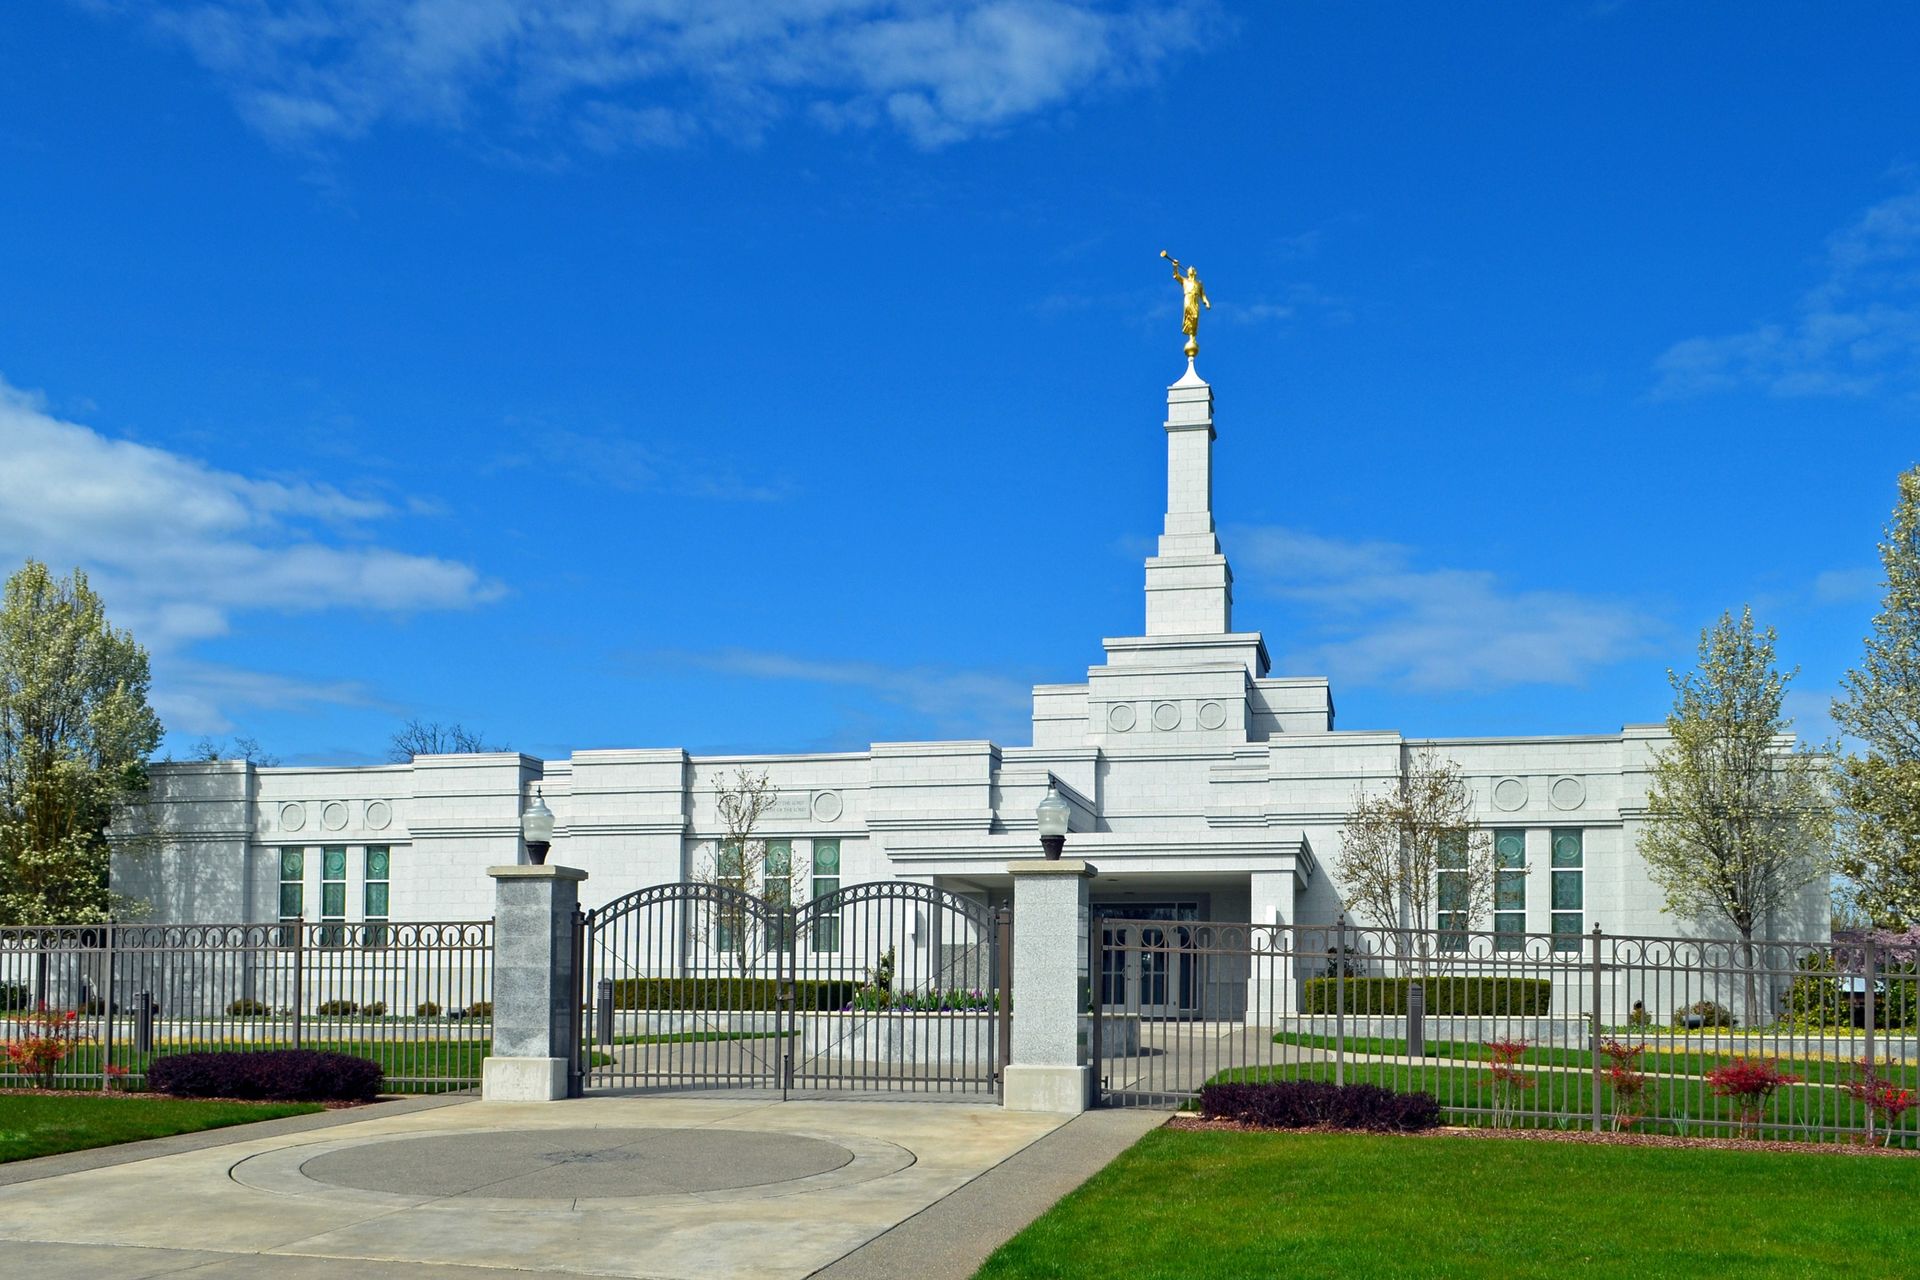 The Medford Oregon Temple entrance, including scenery.